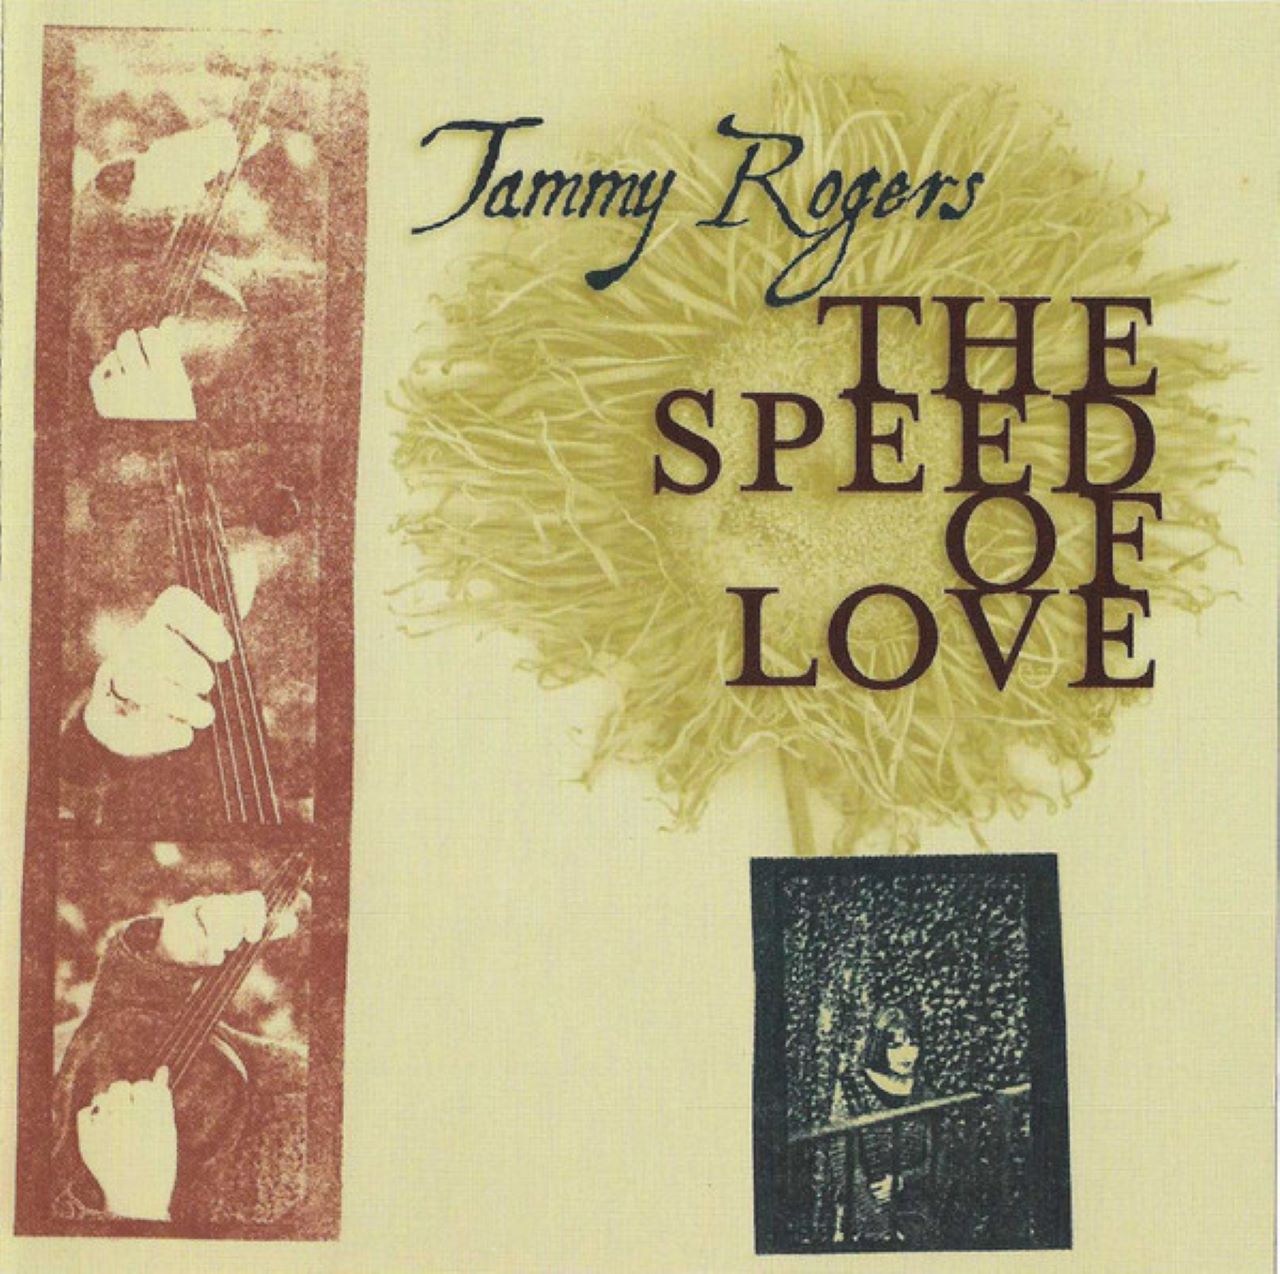 Tammy Rogers - The Speed Of Love cover album